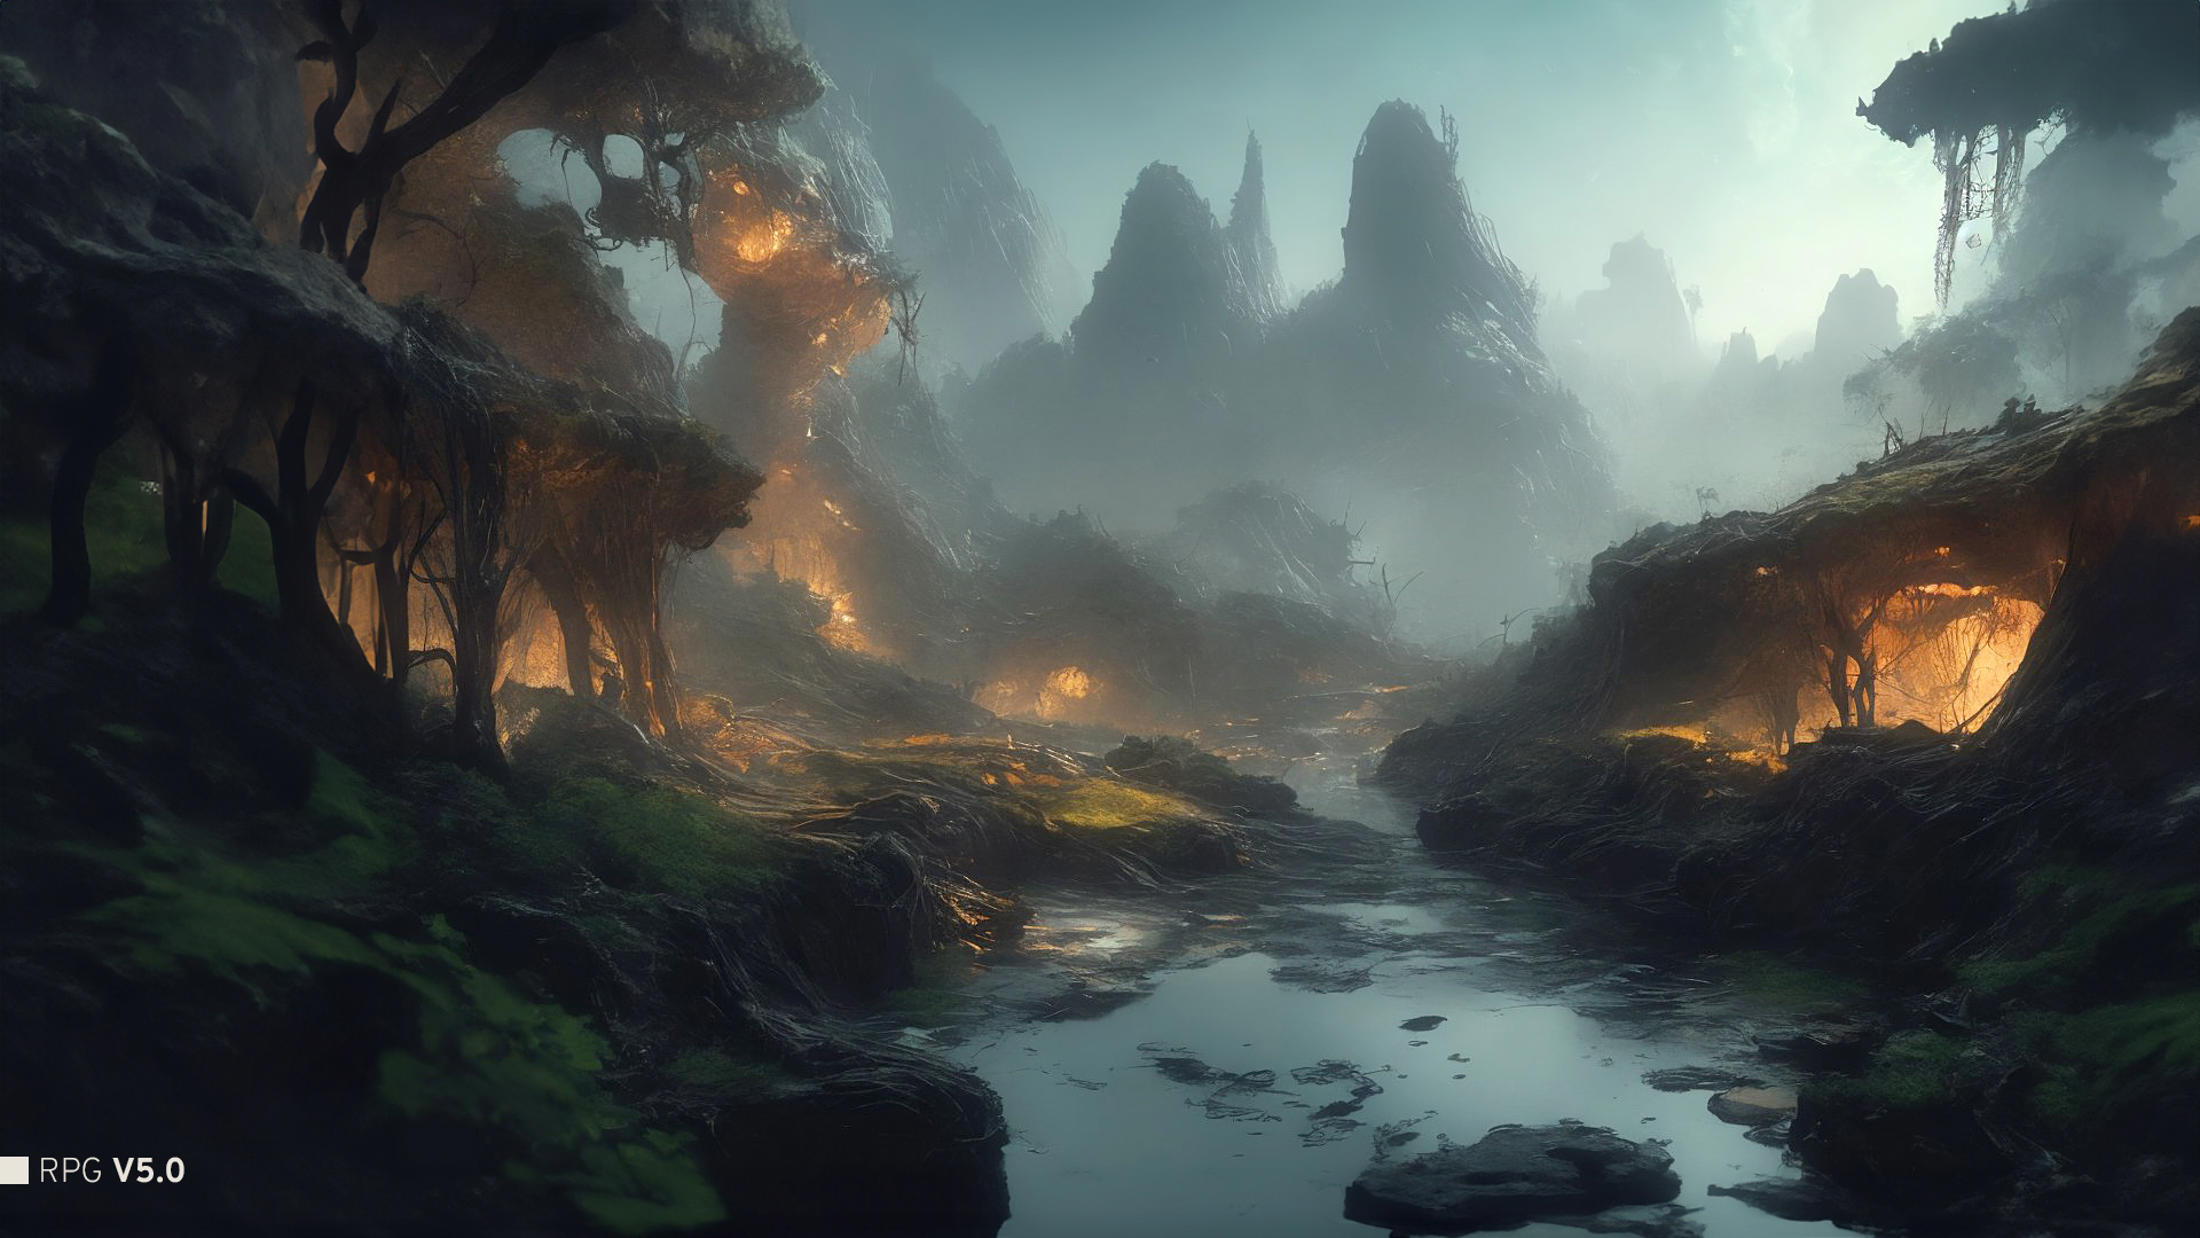 A mystical scene of a river flowing through a mountainous landscape with misty skies.